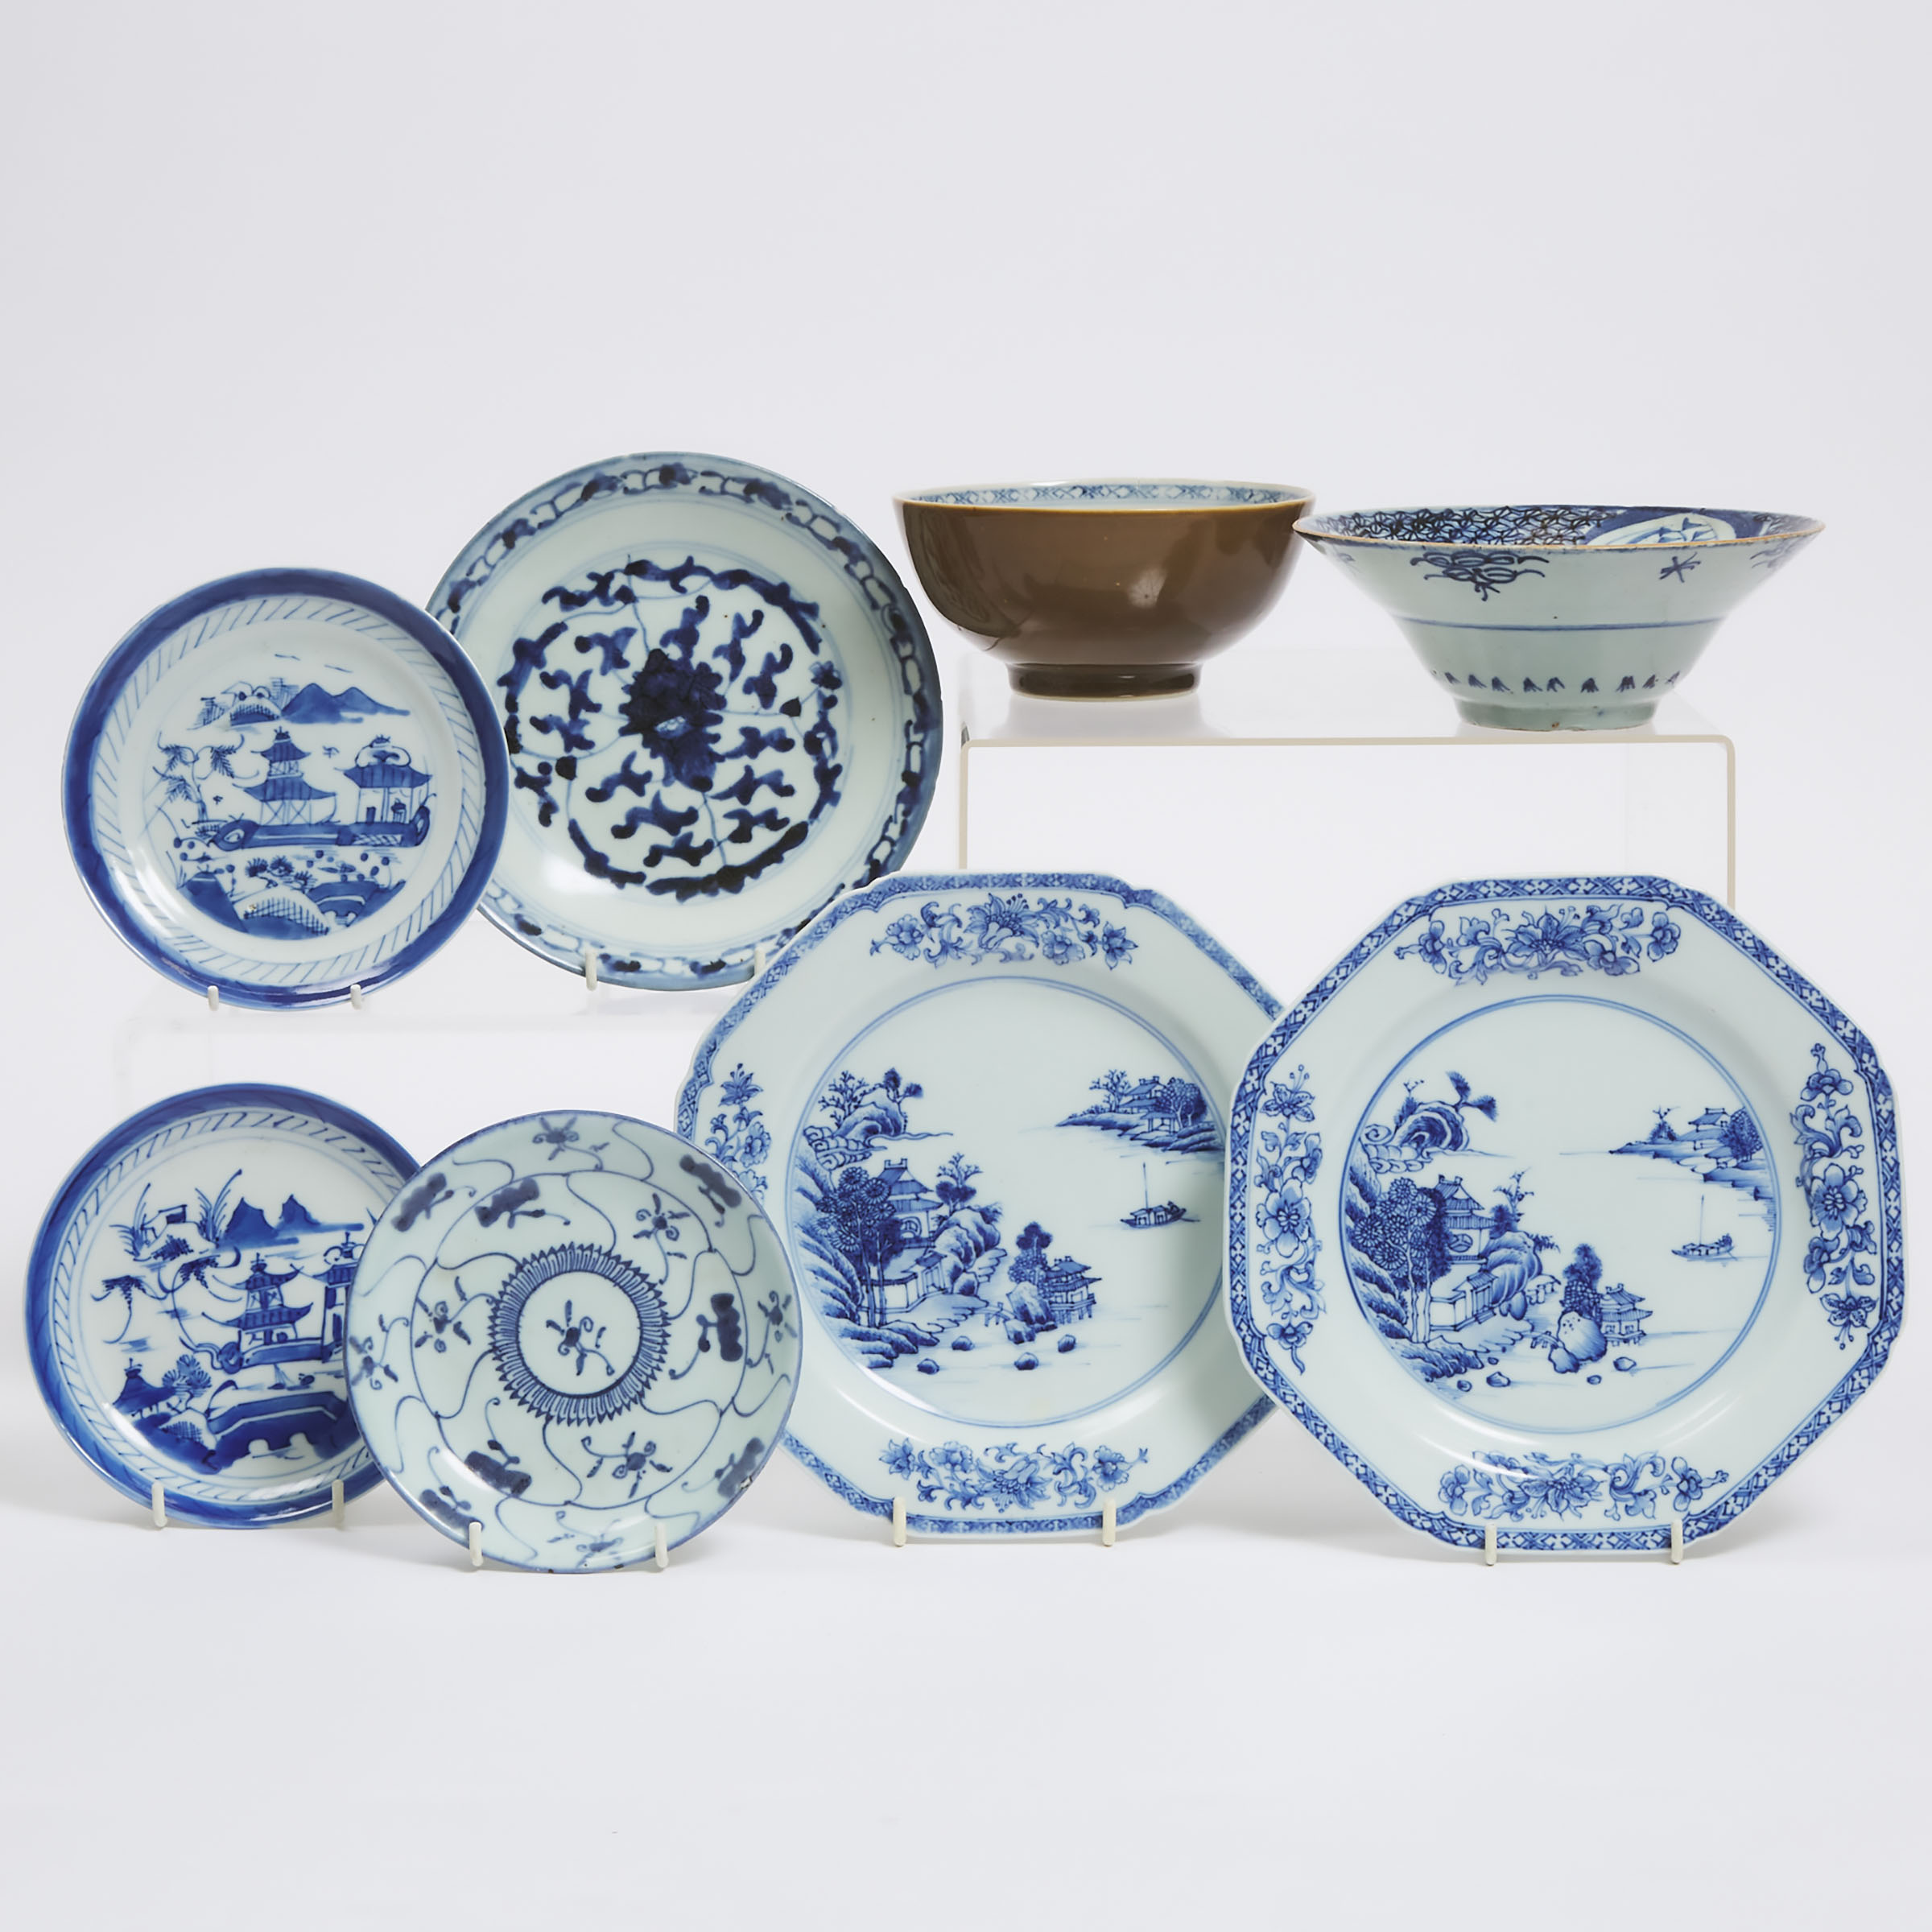 A Group of Eight Chinese Export Blue and White Wares, 17th-19th Century